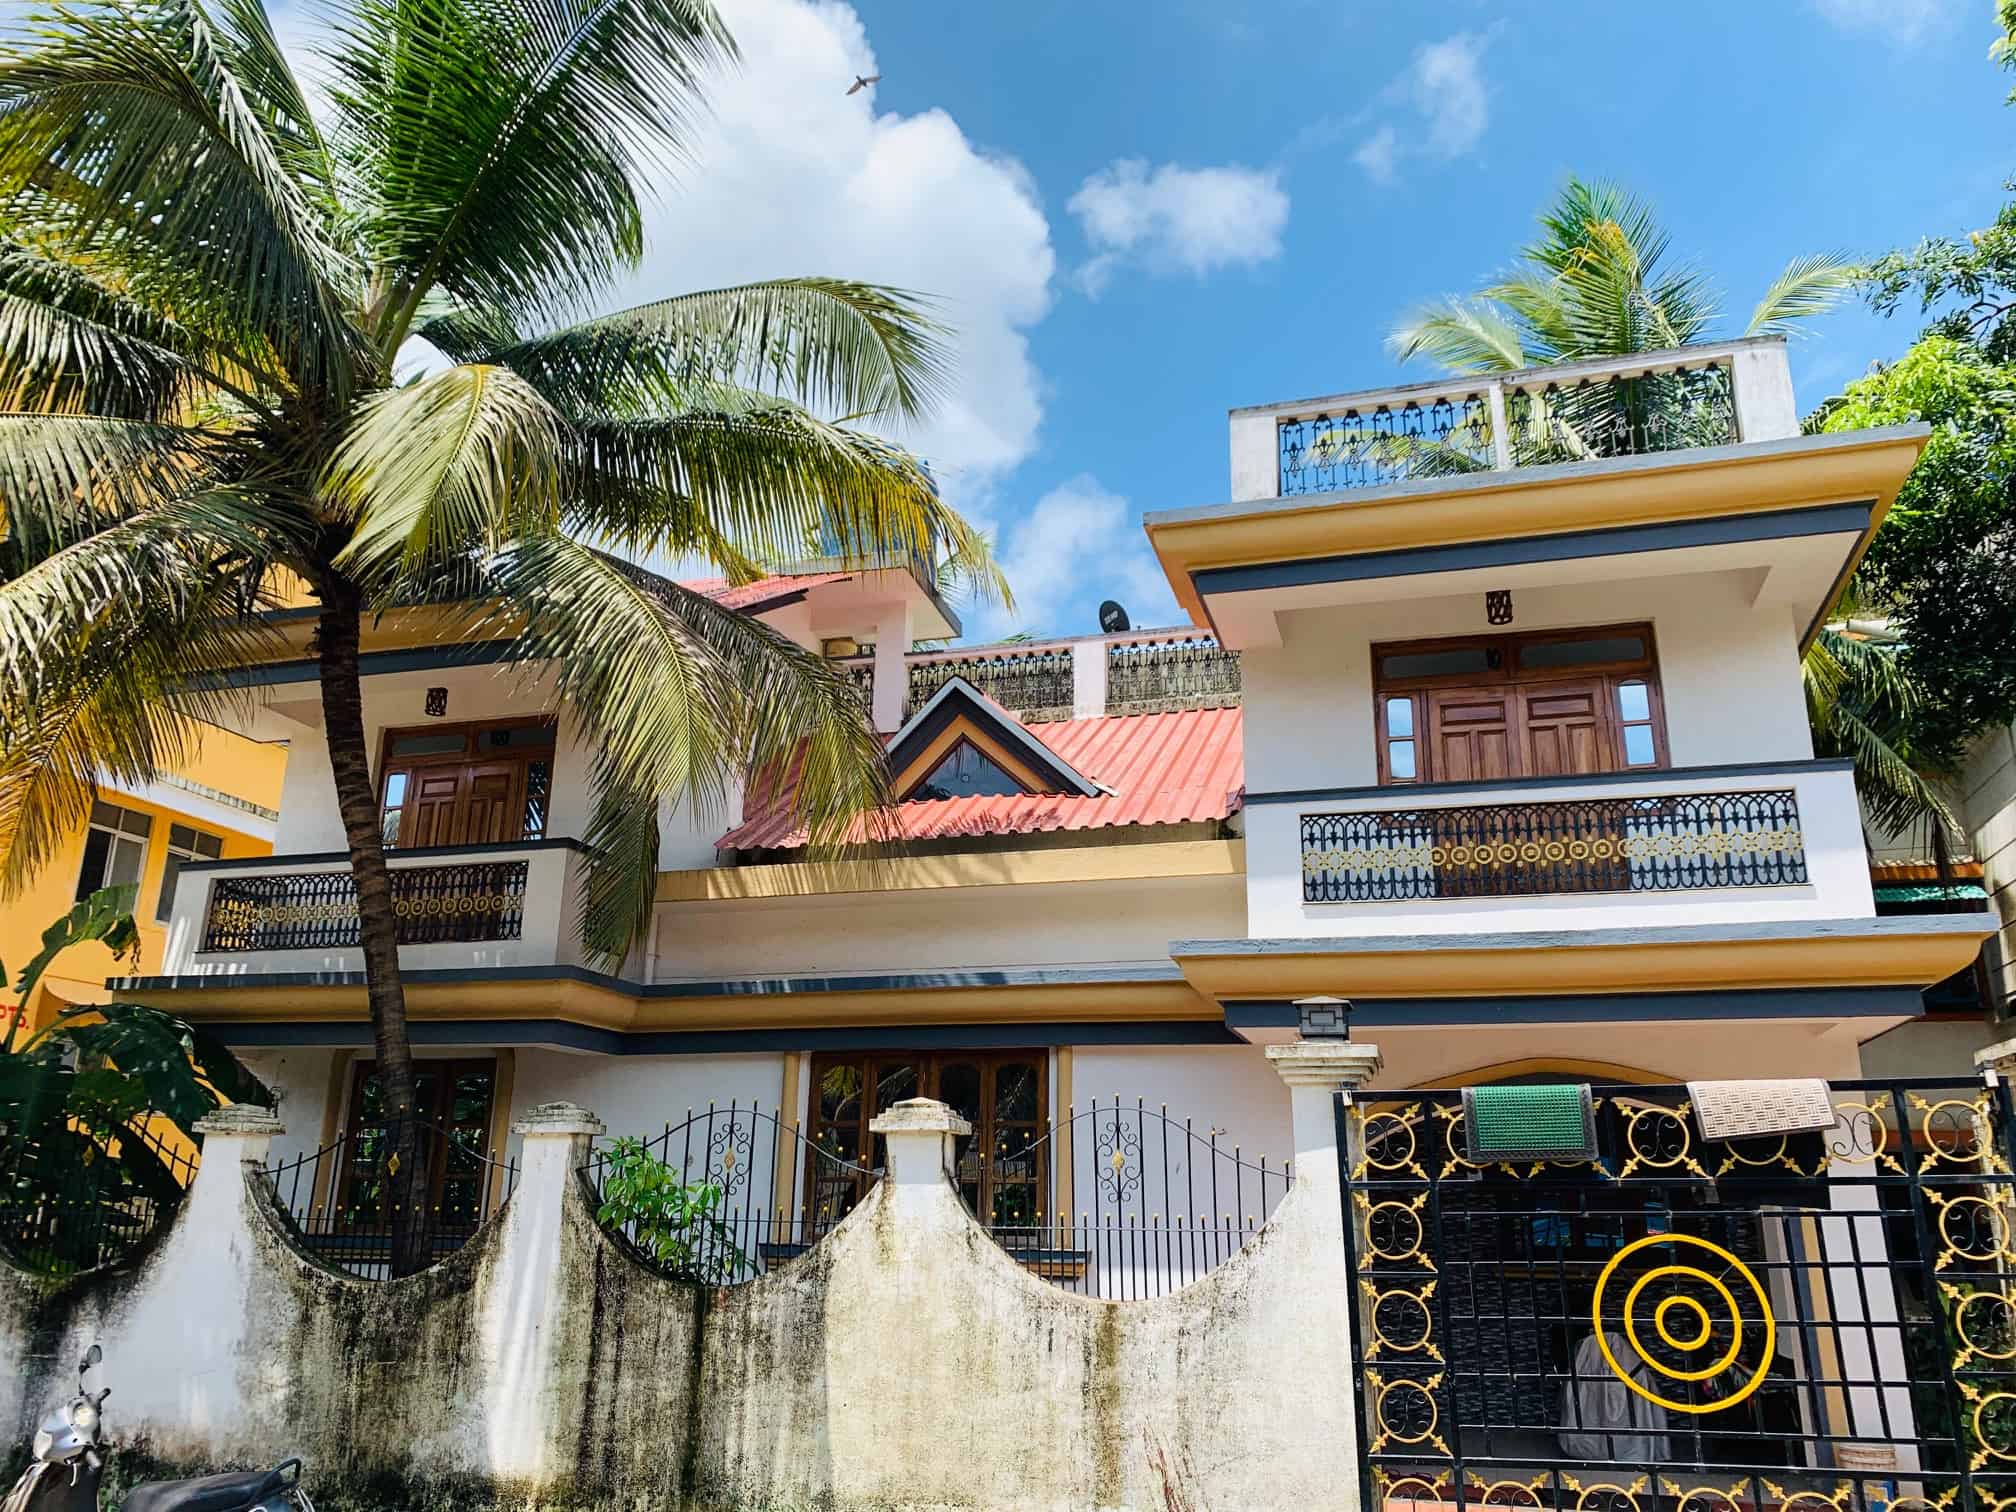 Mohammad Villa HM Construction and The Developers Goa